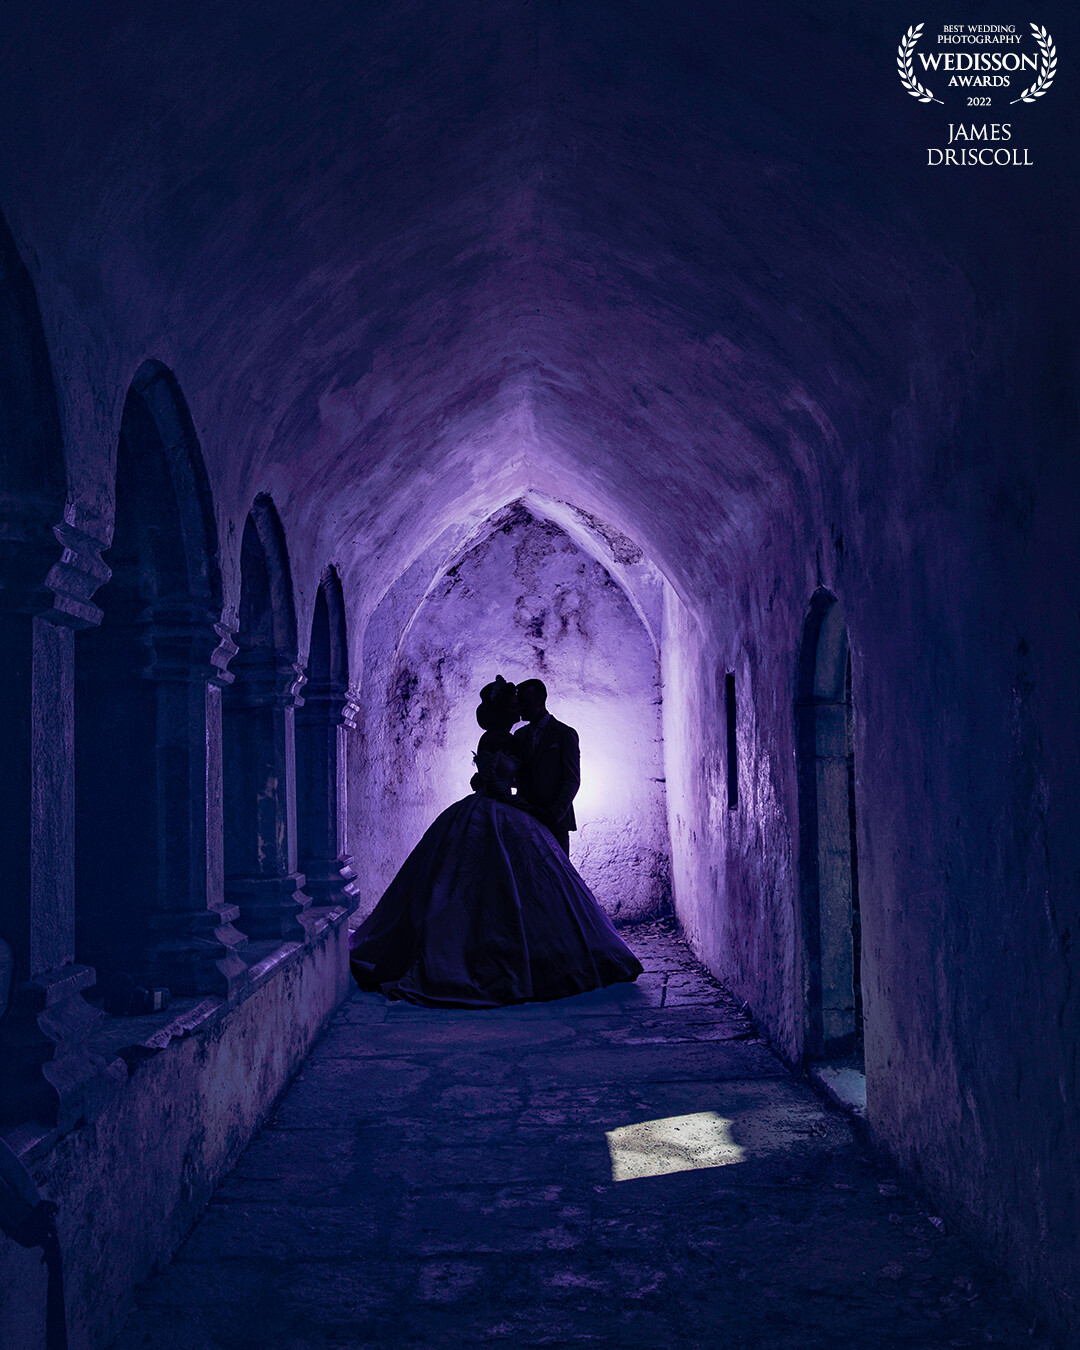 Mark & Shakira in the beautiful mucross abbey in Co Kerry.<br />
<br />
Using a purple gel and backlight brings an enchanting feel to this image.<br />
<br />
Thank you wedissons